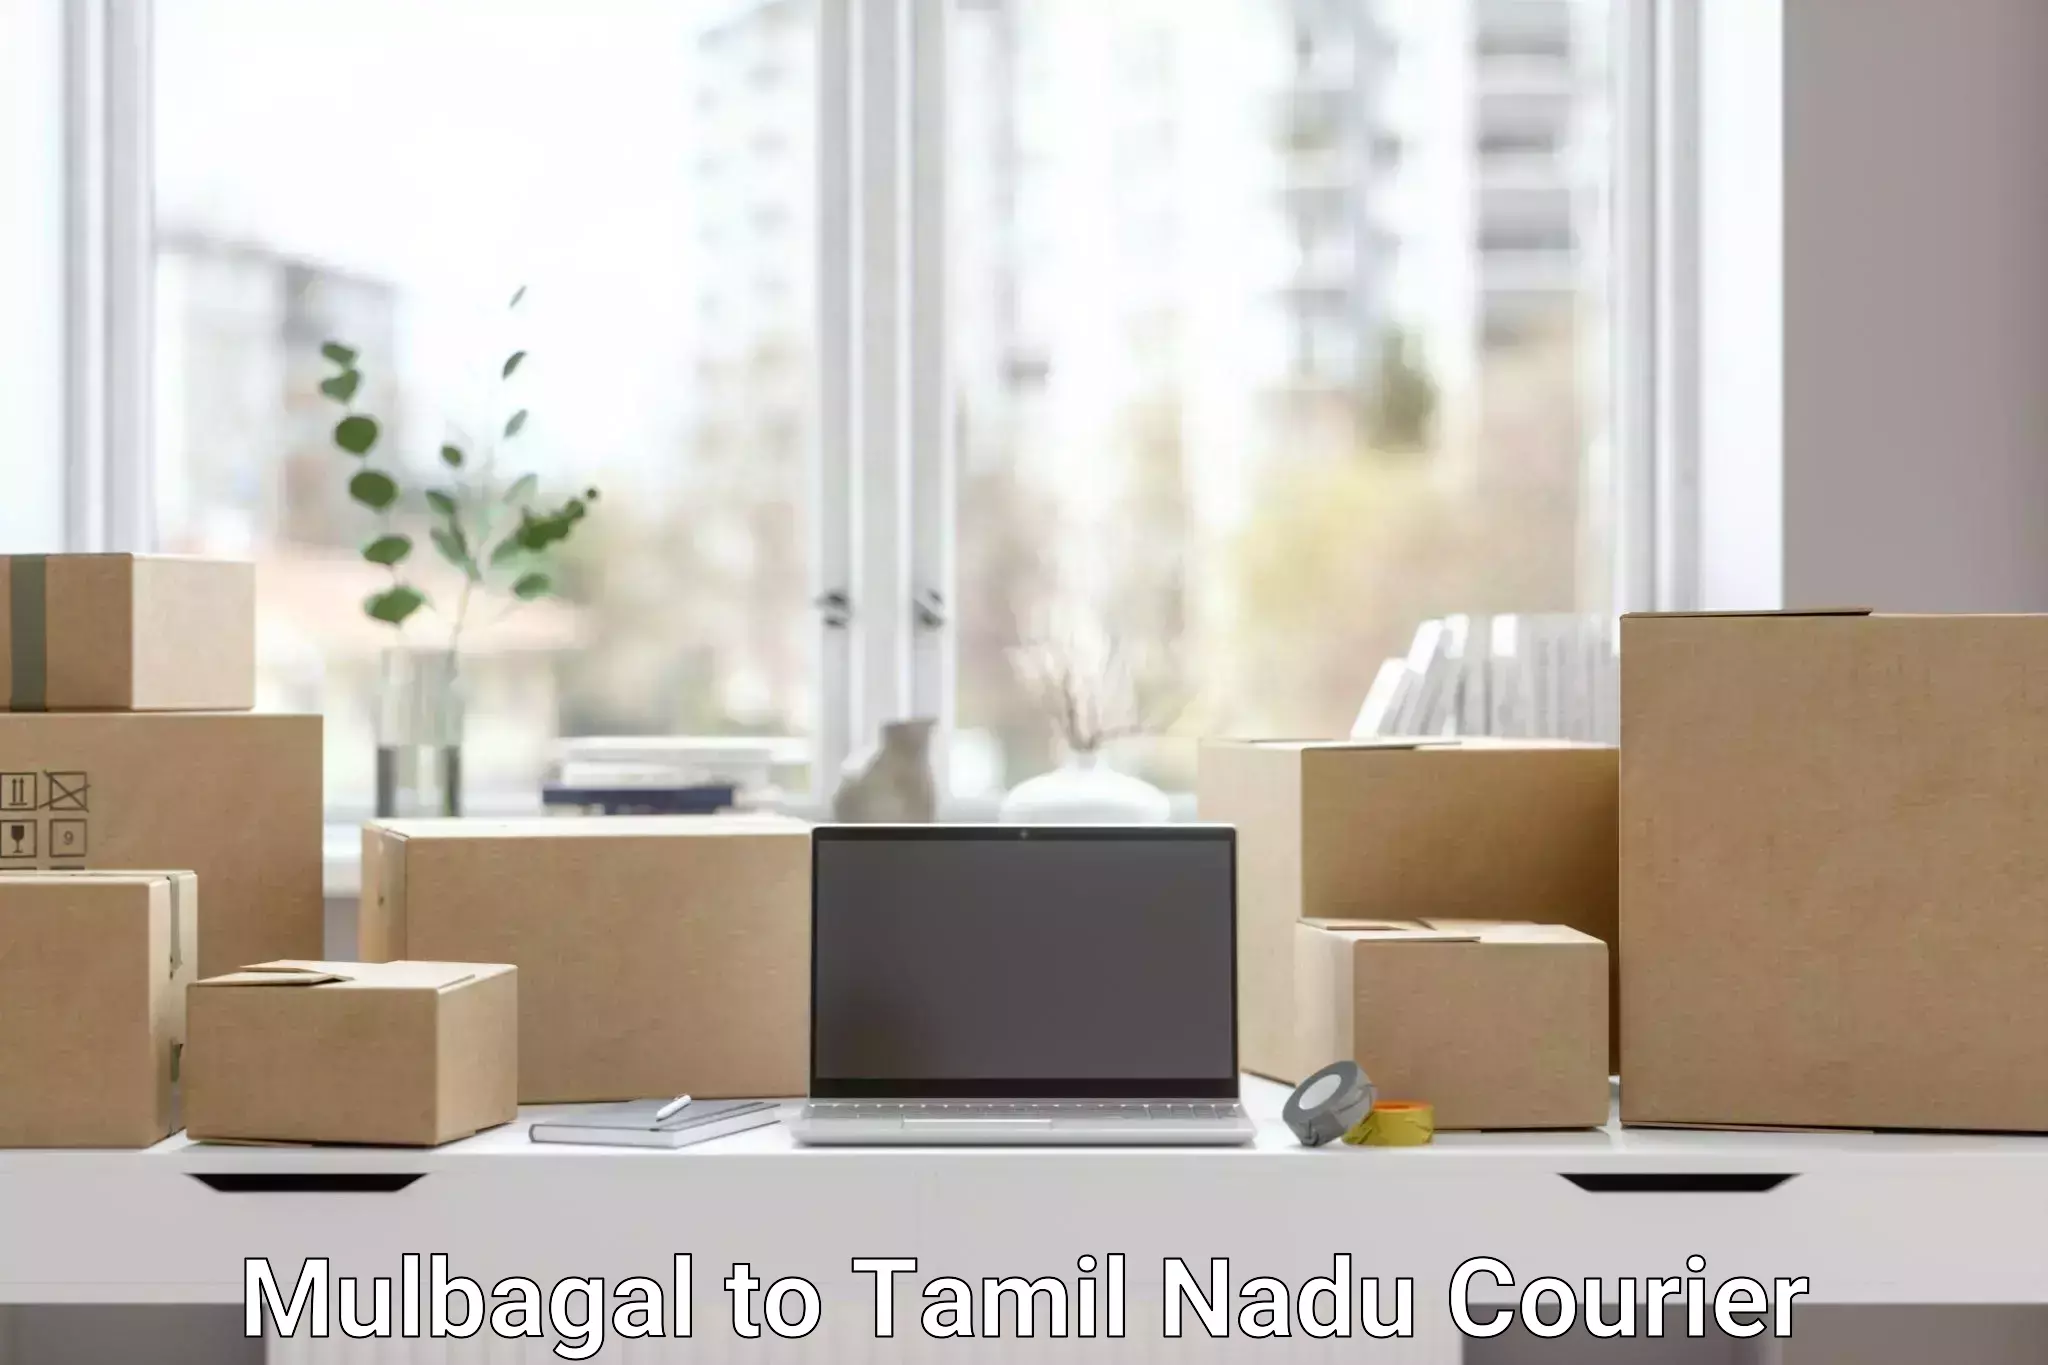 Advanced shipping network Mulbagal to Tamil Nadu